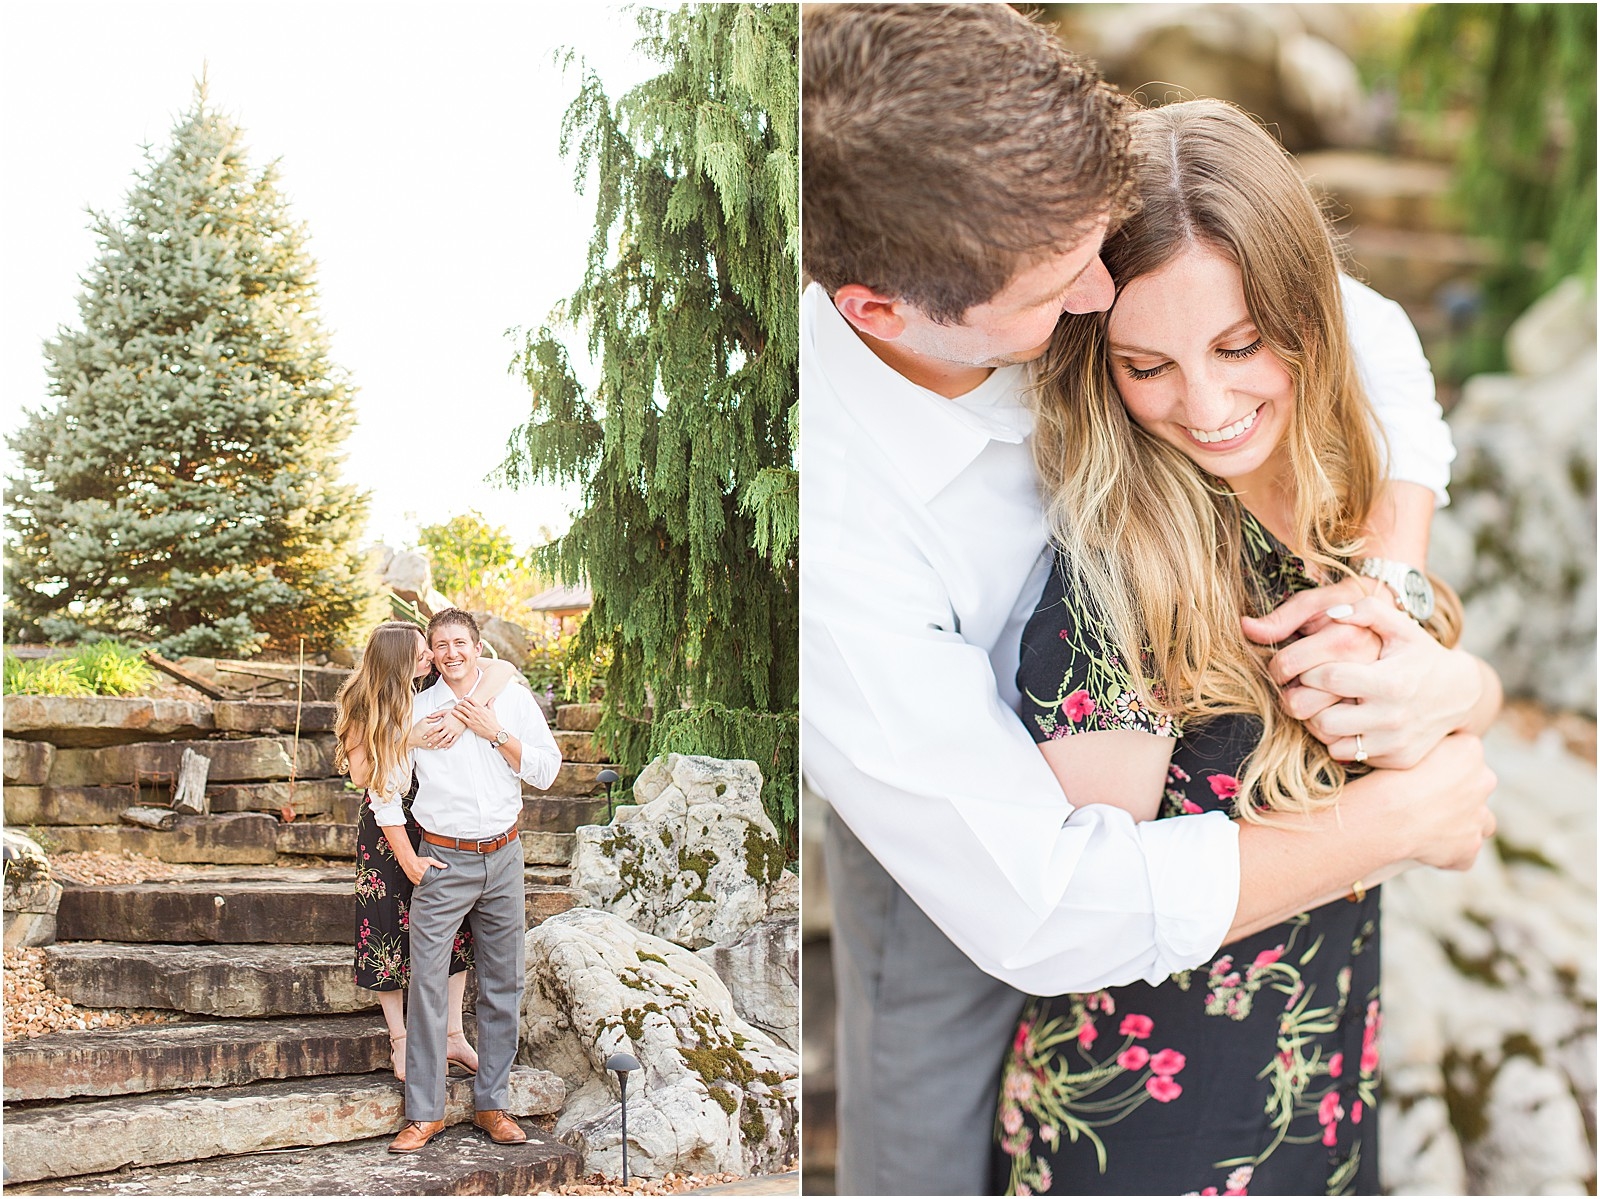 A Jasper Indiana Engagement Session | Tori and Kyle | Bret and Brandie Photography017.jpg